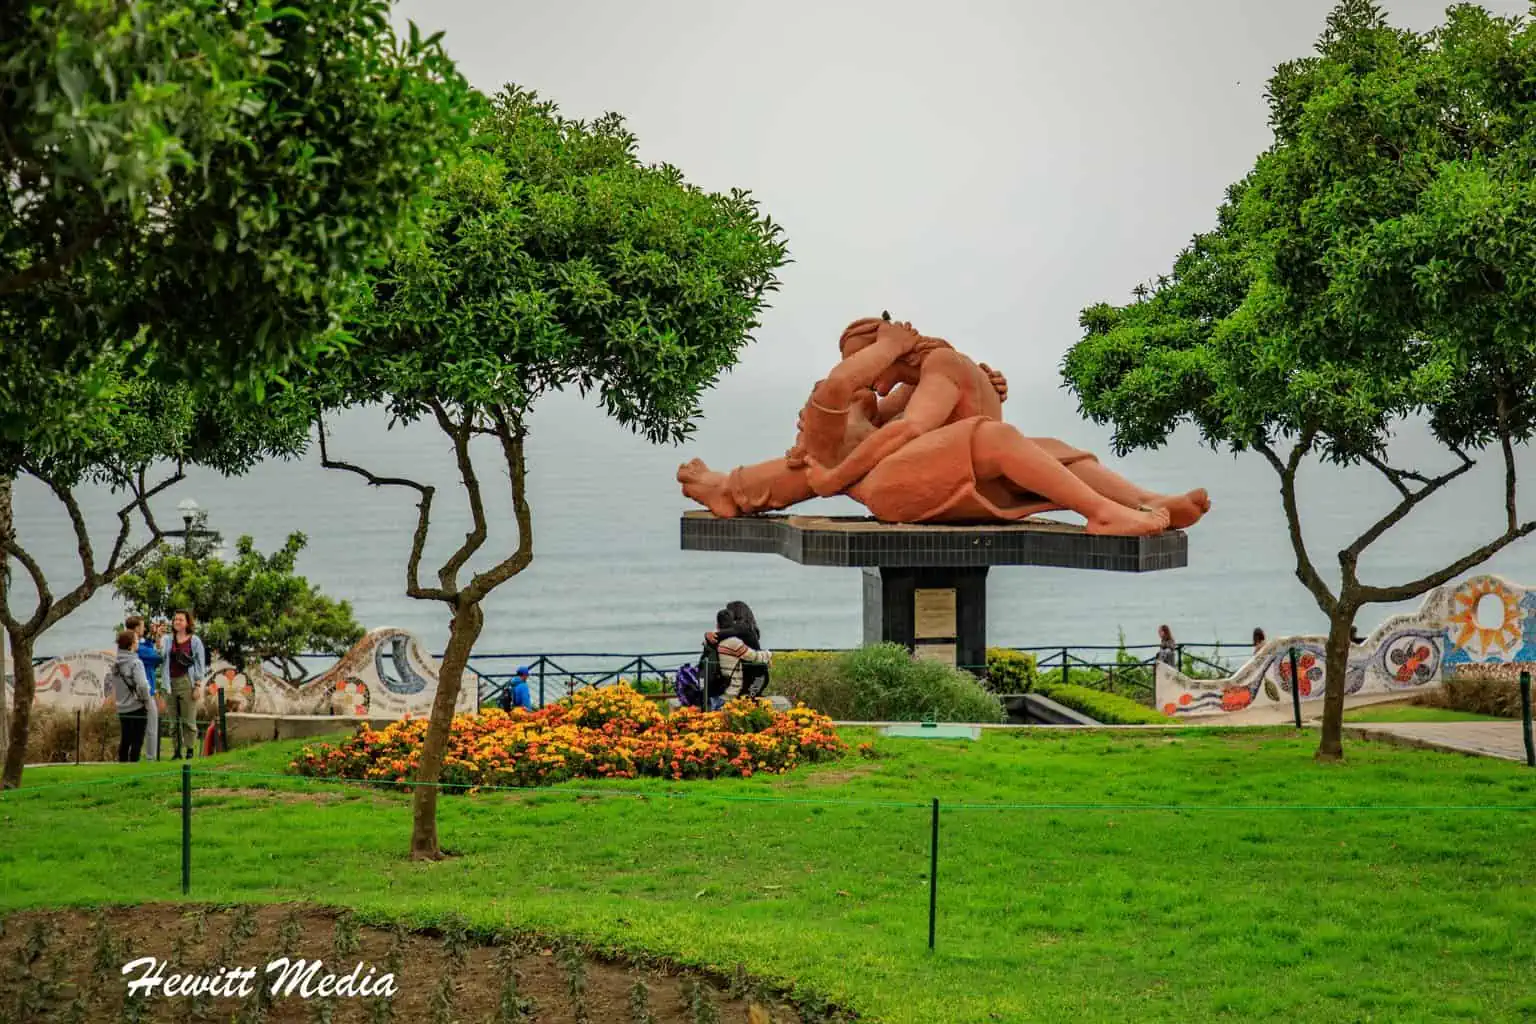 Lima Peru Travel Guide - The Park of Love